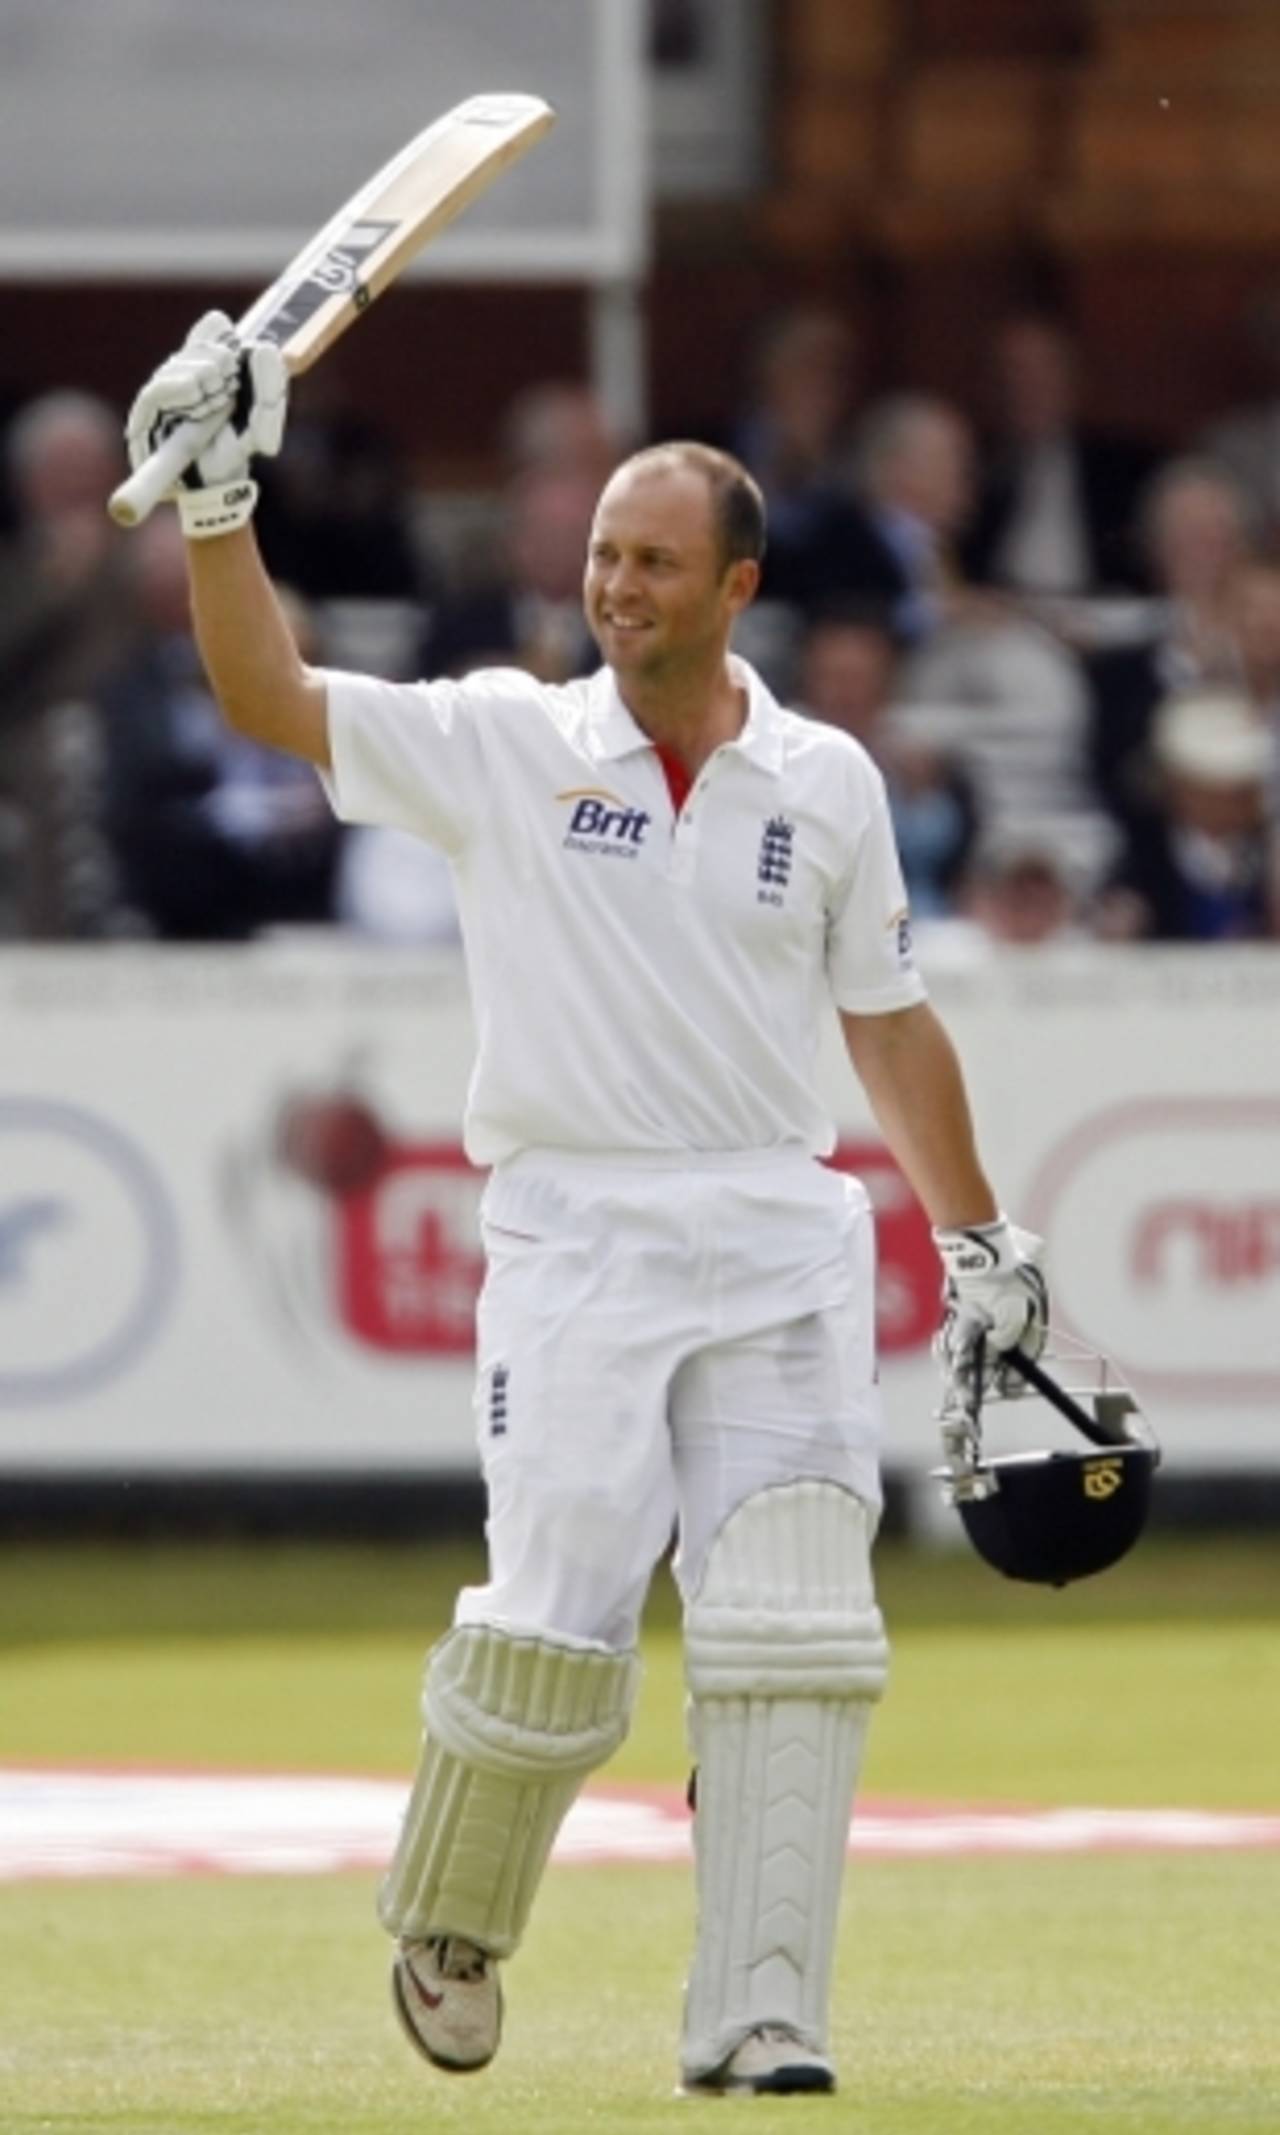 Jonathan Trott acknowledges the applause after reaching his century, England v Bangladesh, 1st Test, Lord's, May 27, 2010